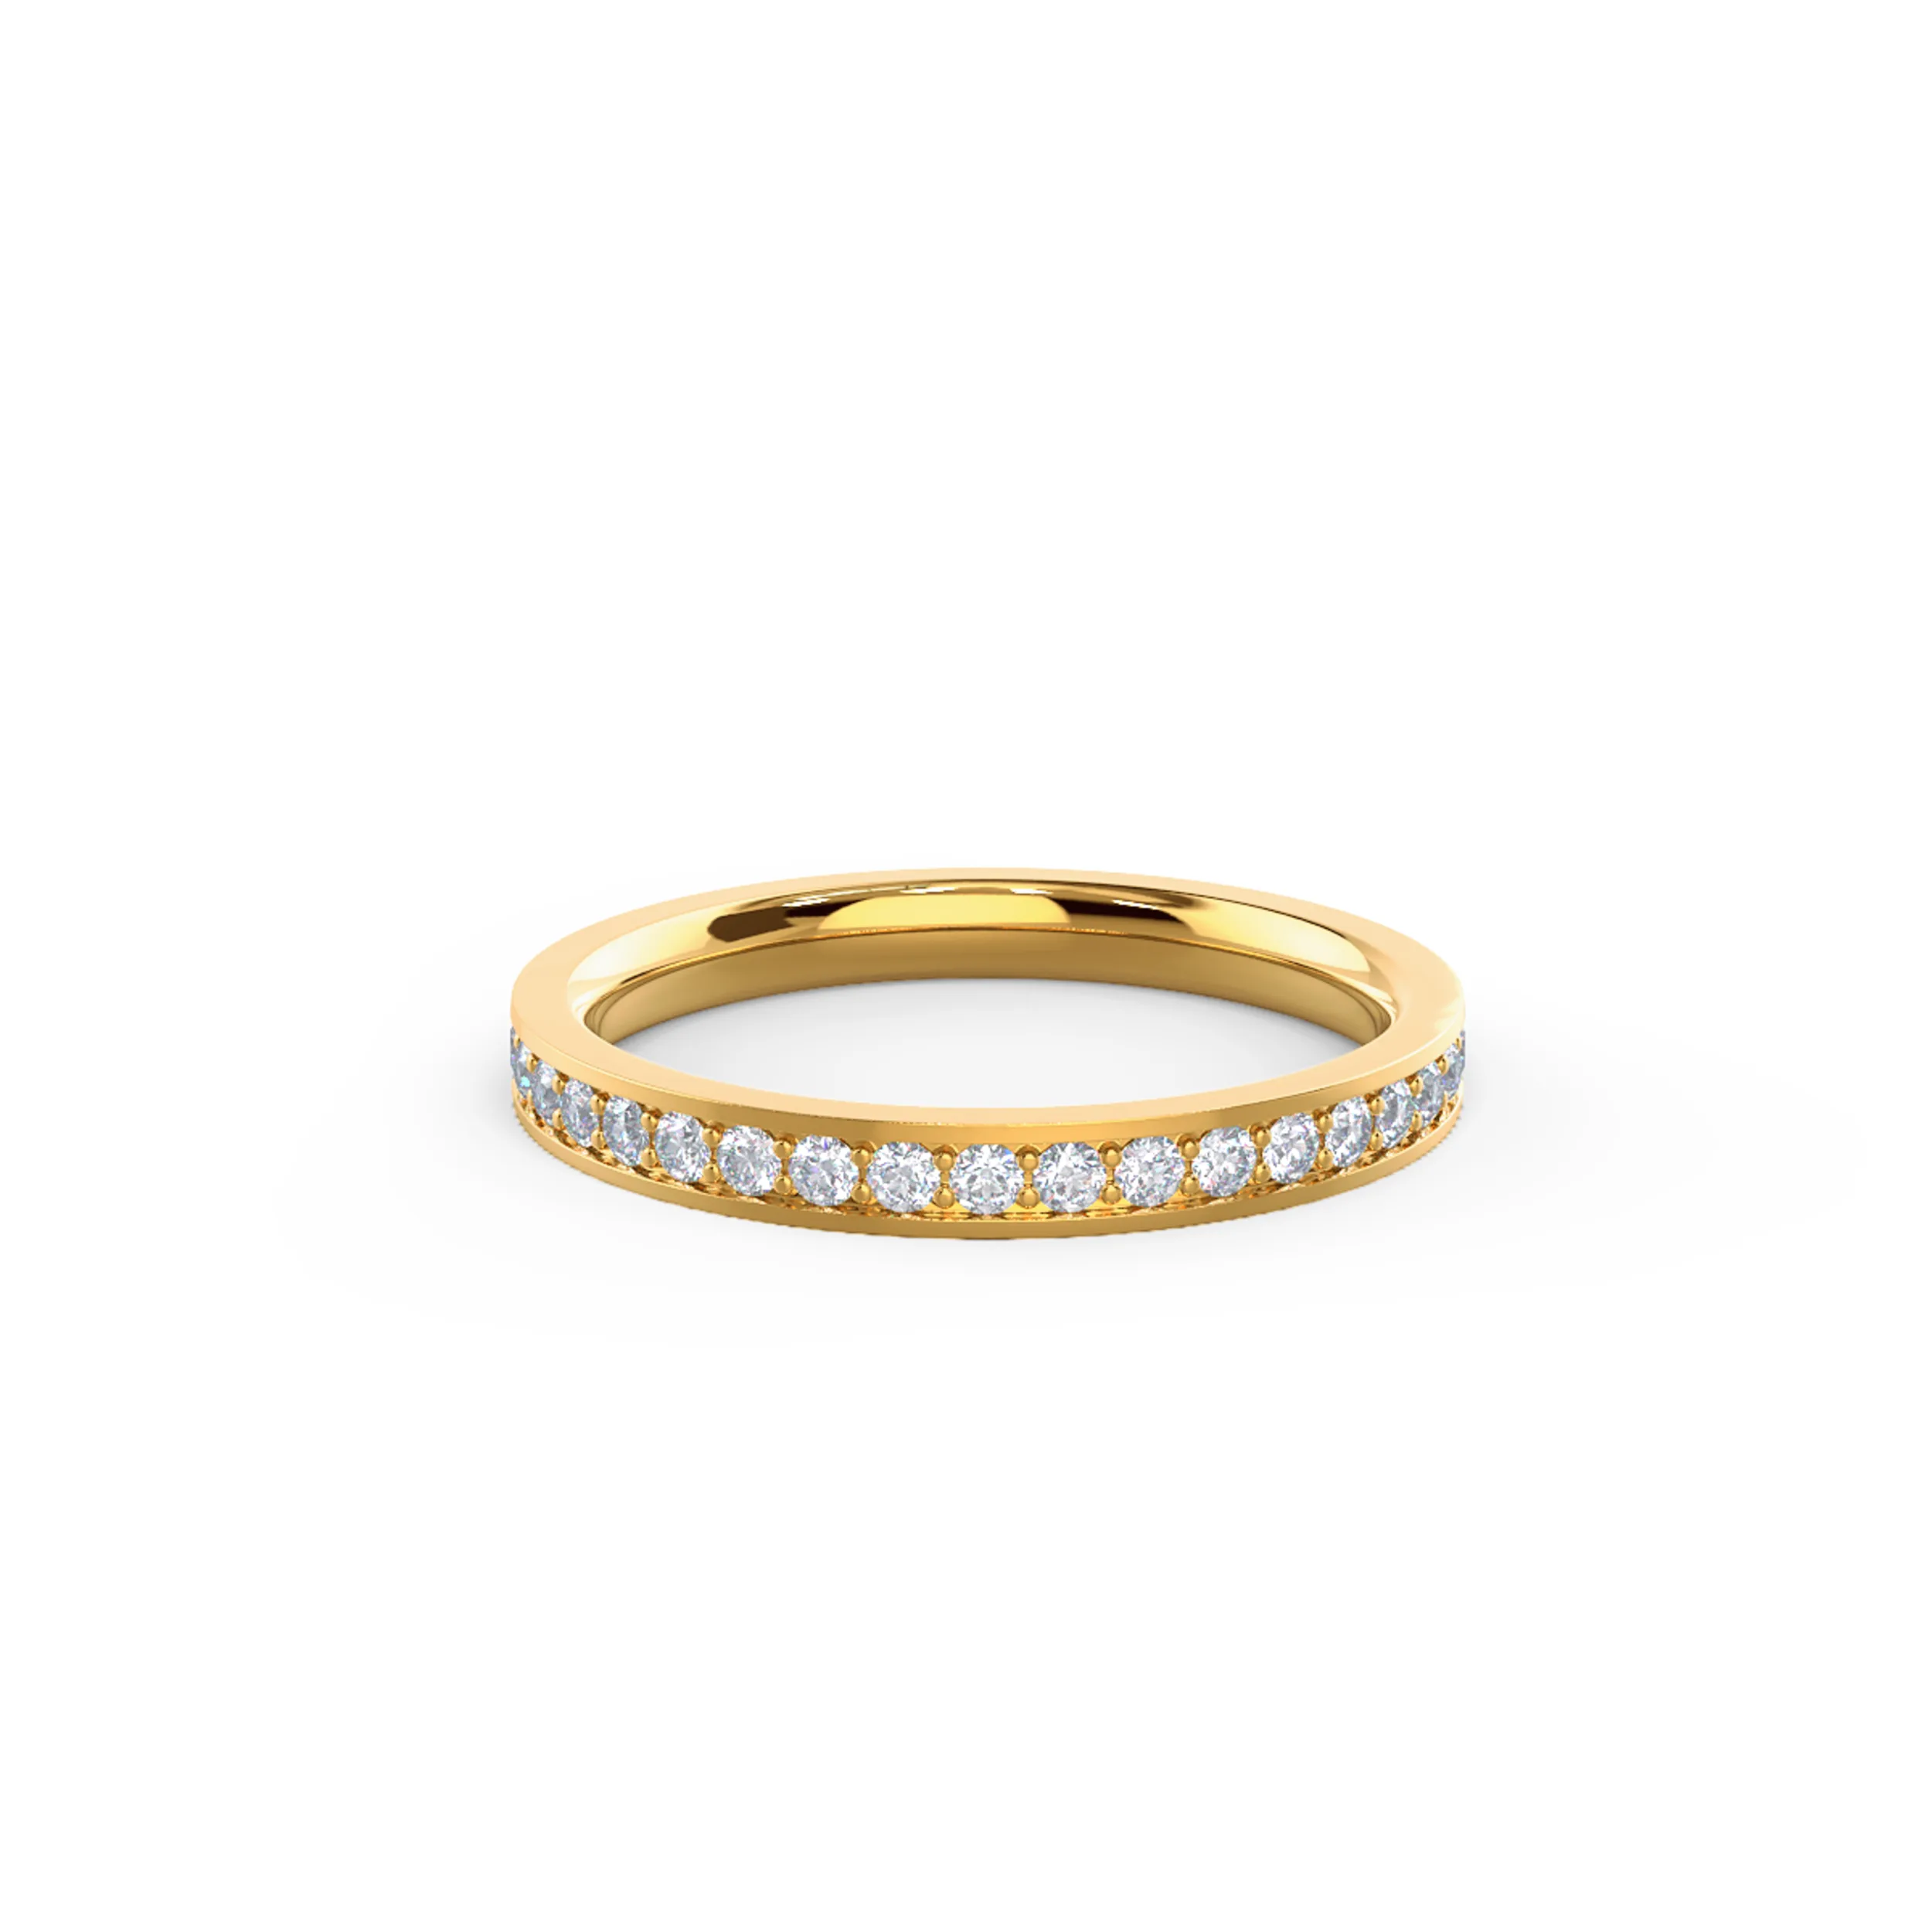 14k Yellow Gold Channel Set Eternity Band featuring 0.55 ct Round Brilliant Man Made Diamonds (Main View)